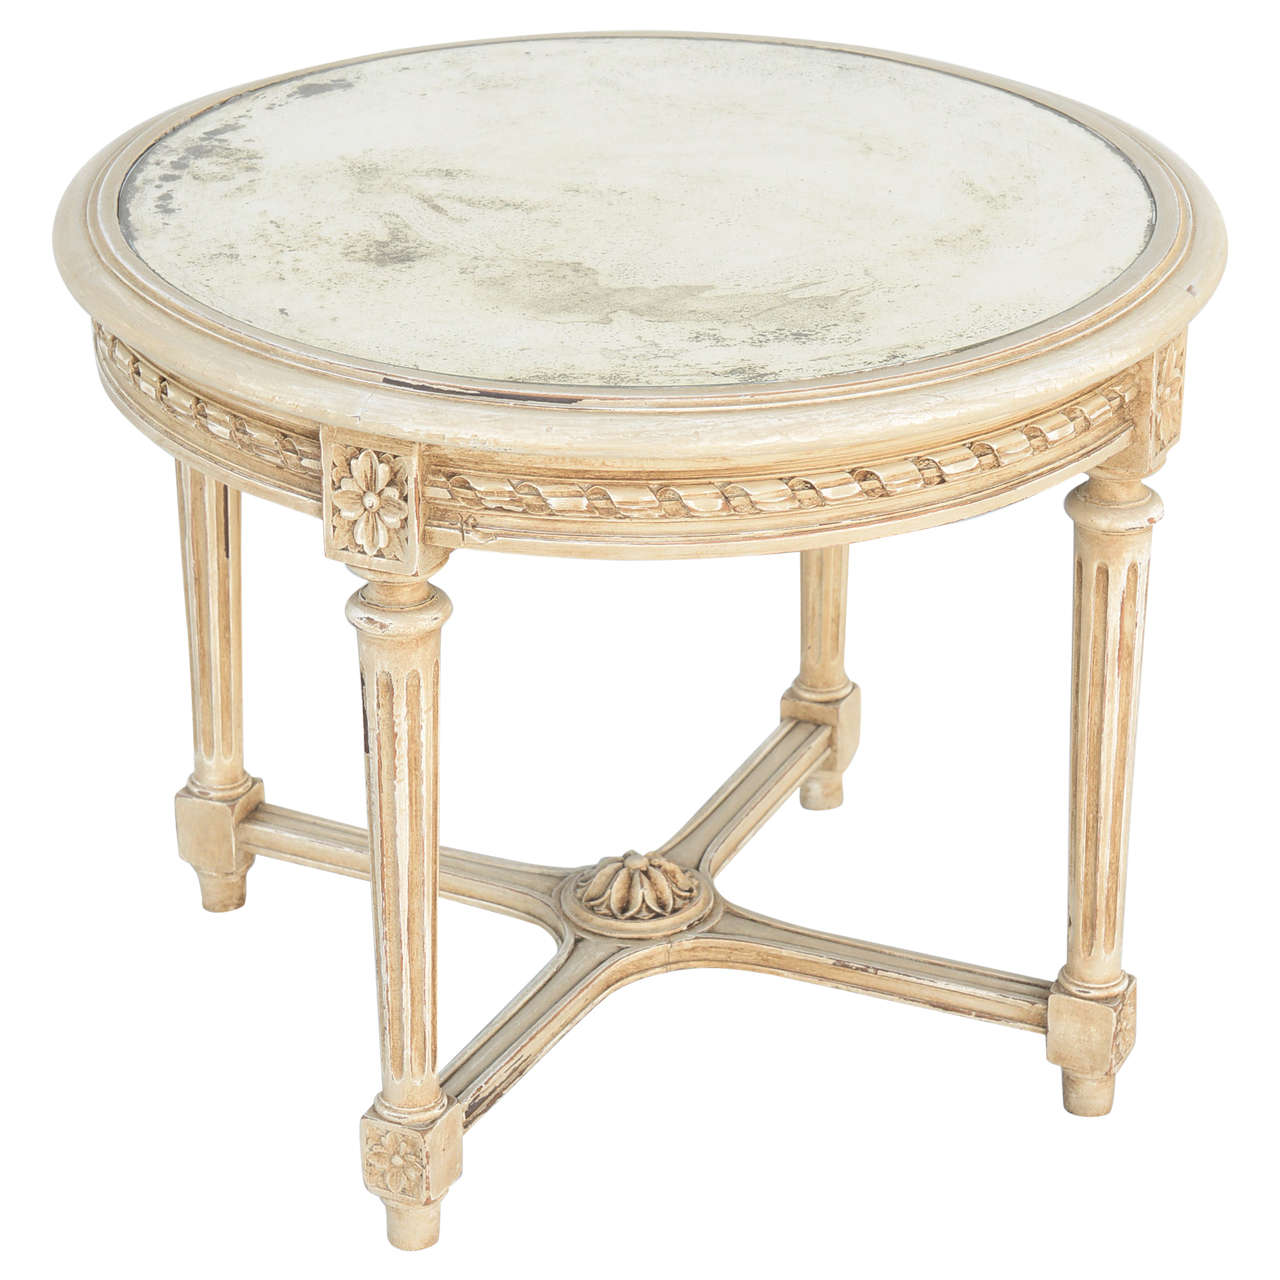 round accent table for painted metal louis xvi style with mirrored top end lamps plastic covers west elm couch mirror drawers home goods tables floor separator white drum barn